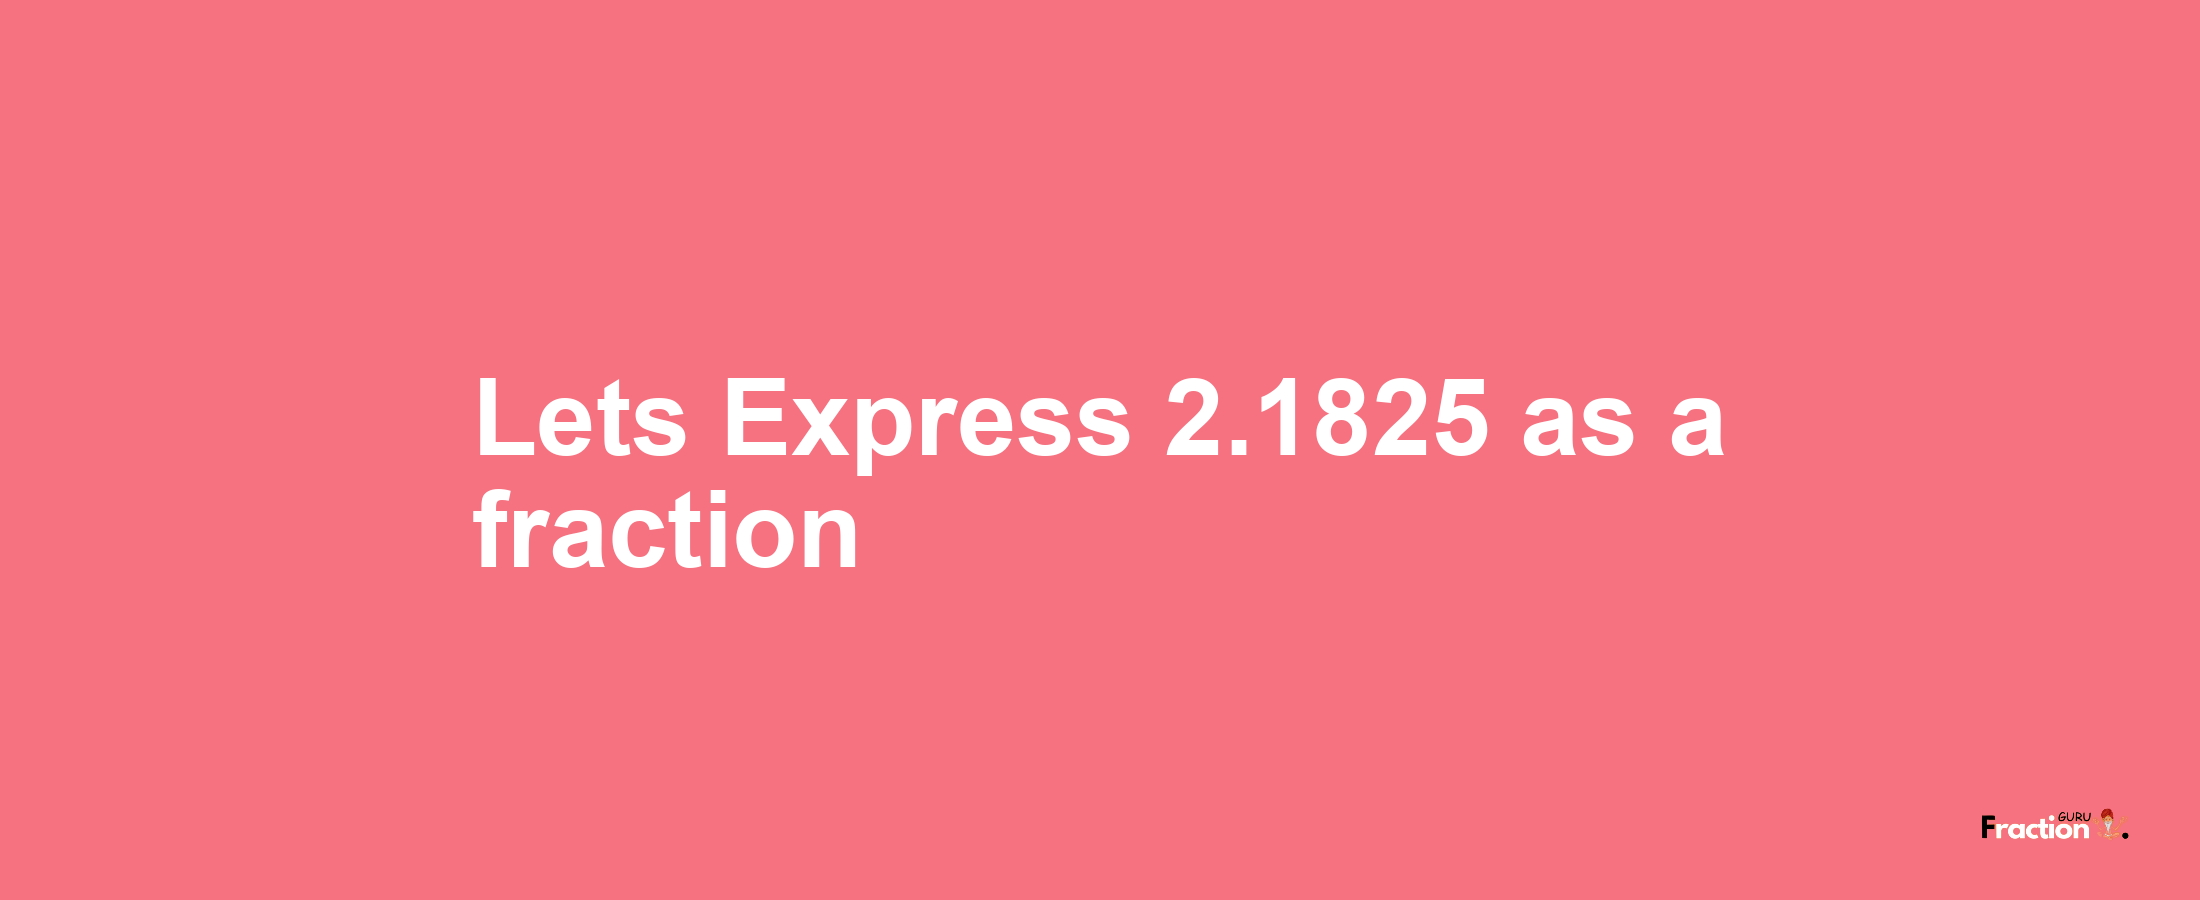 Lets Express 2.1825 as afraction